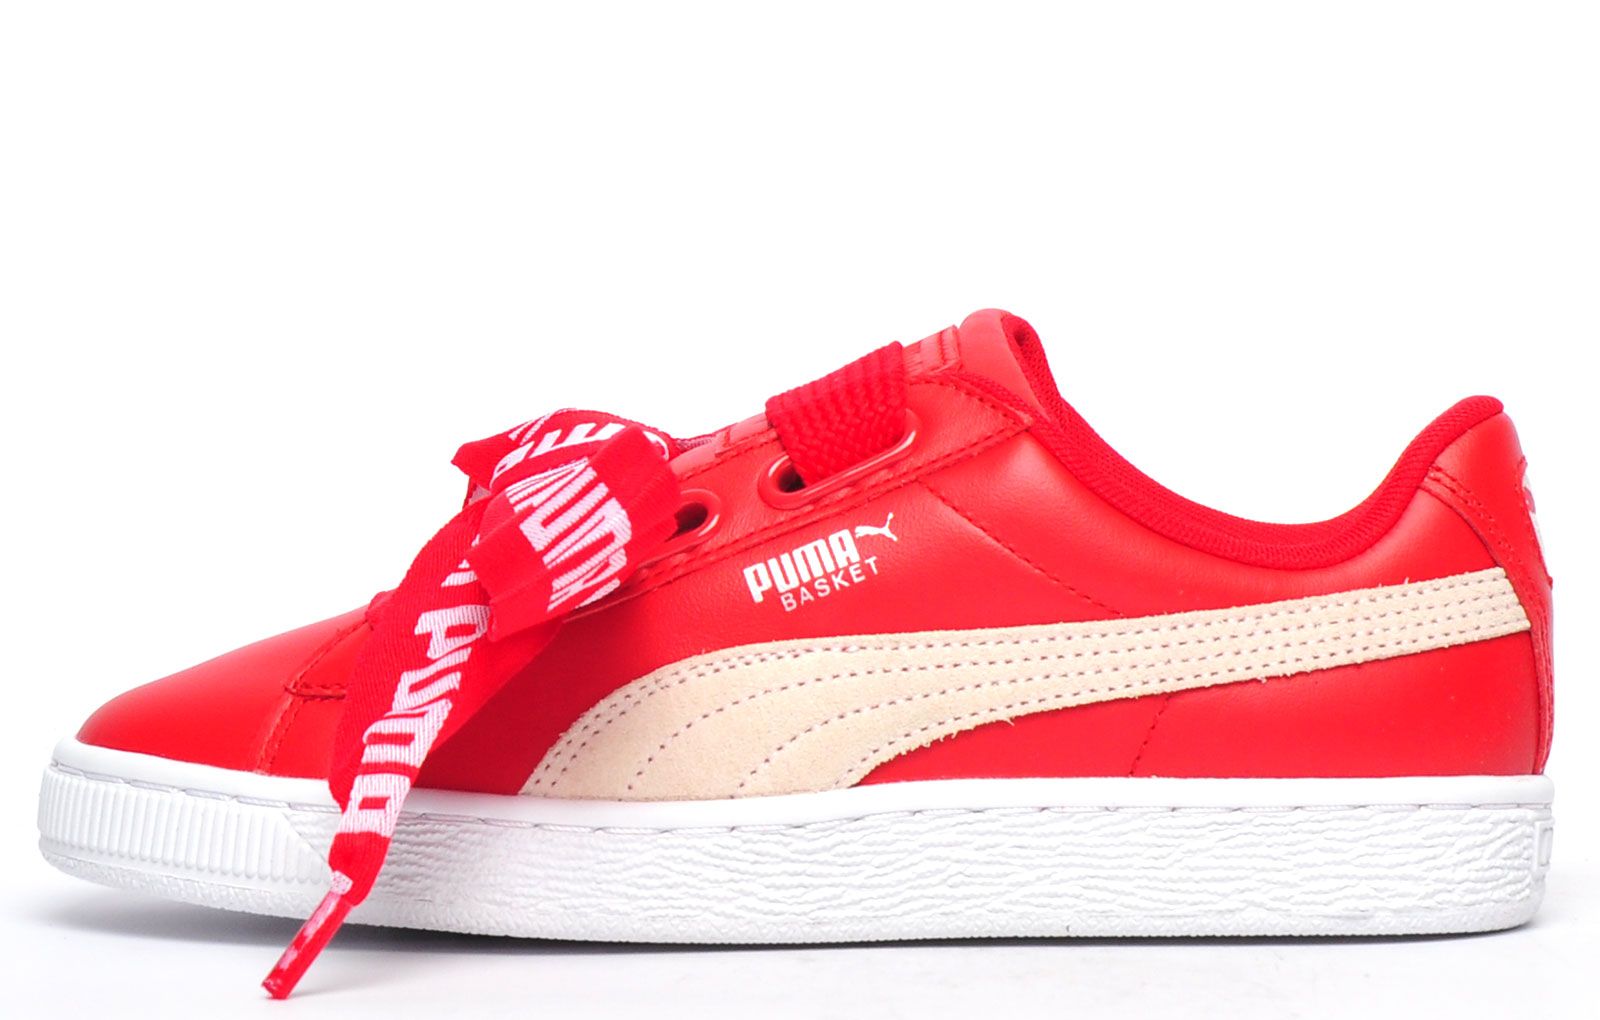 Step out in style with these premium Basket Heart womens trainers from Puma. A modern sleek silhouette crafted with premium red leather with iconic suede overlay, these Puma trainers deliver a first-class statement look, for a bang on trend style.
 Delivering five star comfort these womens trainers sport a padded heel and ankle collar. Featuring a unique lace up style proudly displaying the iconic Puma logo for the ultimate finishing touch on these stylish womens trainers.
 -Leather and suede mix upper
 -Vintage styled outsole
 -Padded heel and ankle cushioning
 -Spare laces to change look
 -Unique broad set lace fastening
 -Luxurious inner lining
 -Puma branding throughout